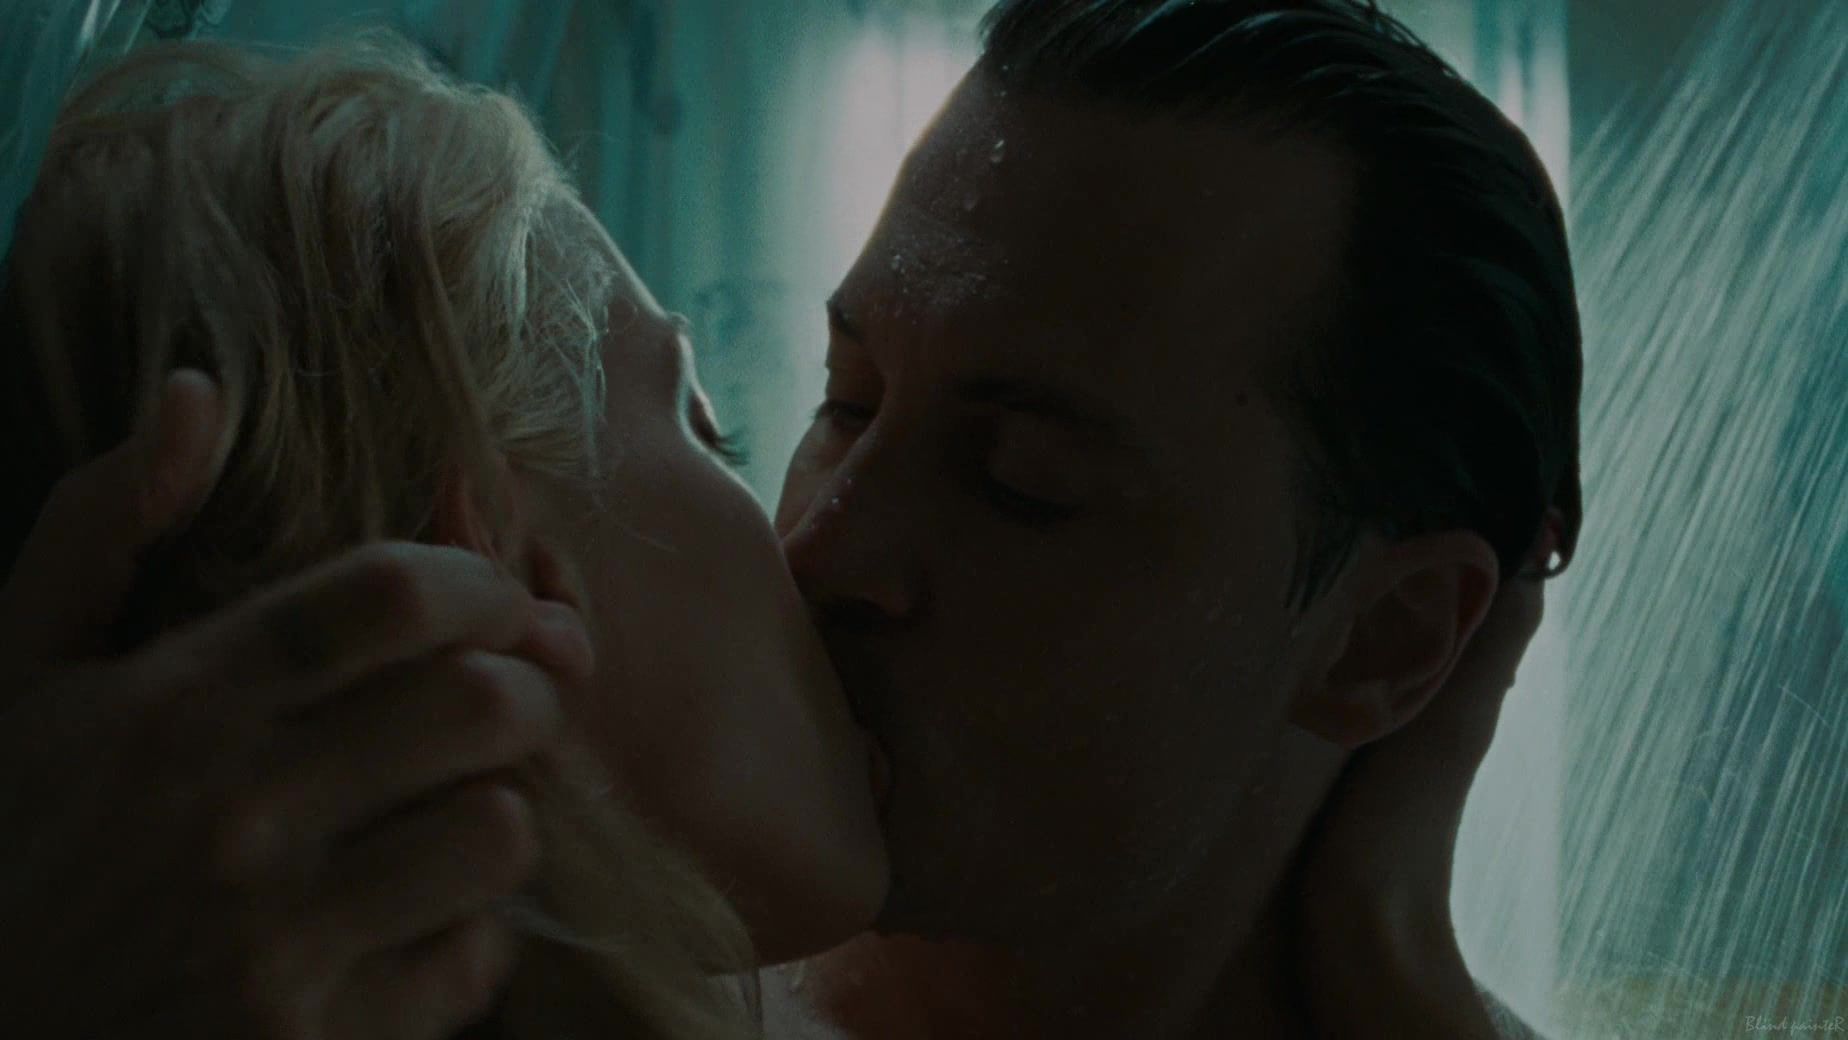 Dirty-Doctor Sex video Amber Heard nude - The Rum Diary (2011) Hardcore